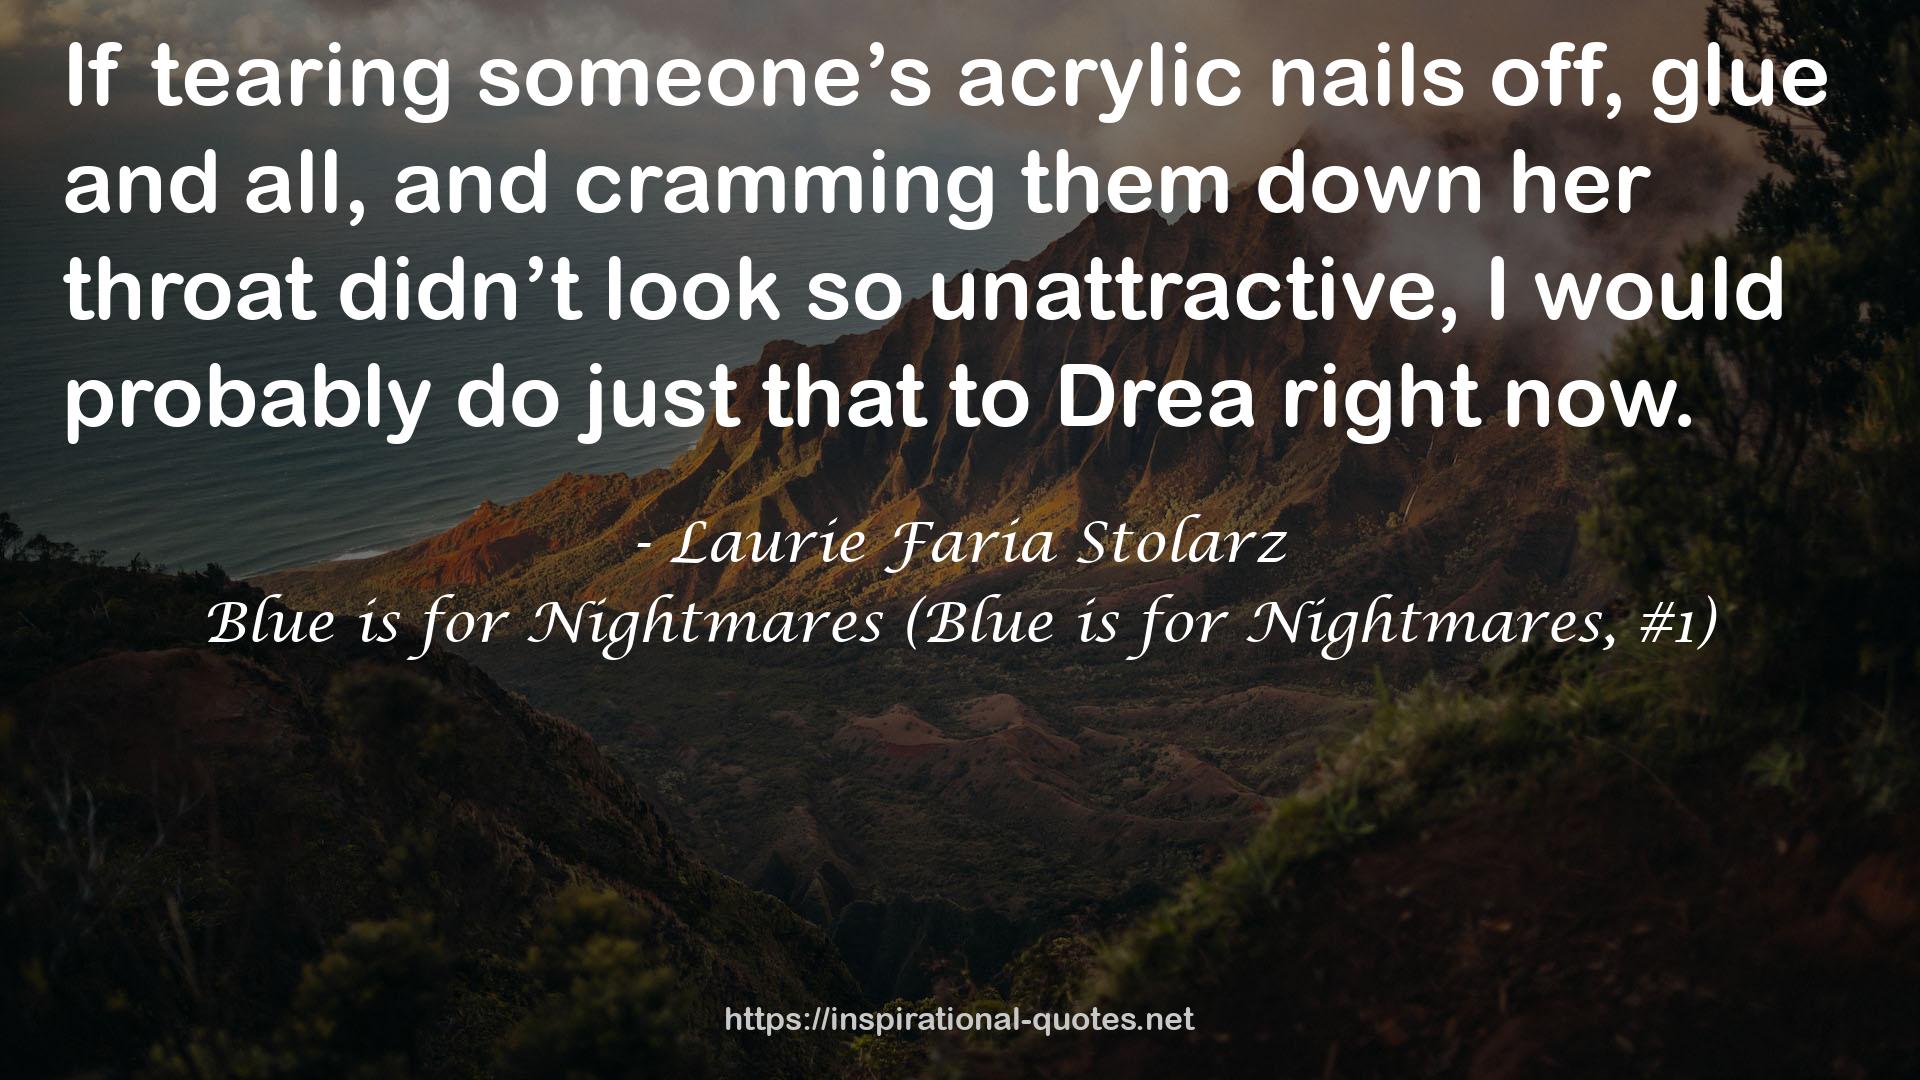 Laurie Faria Stolarz QUOTES